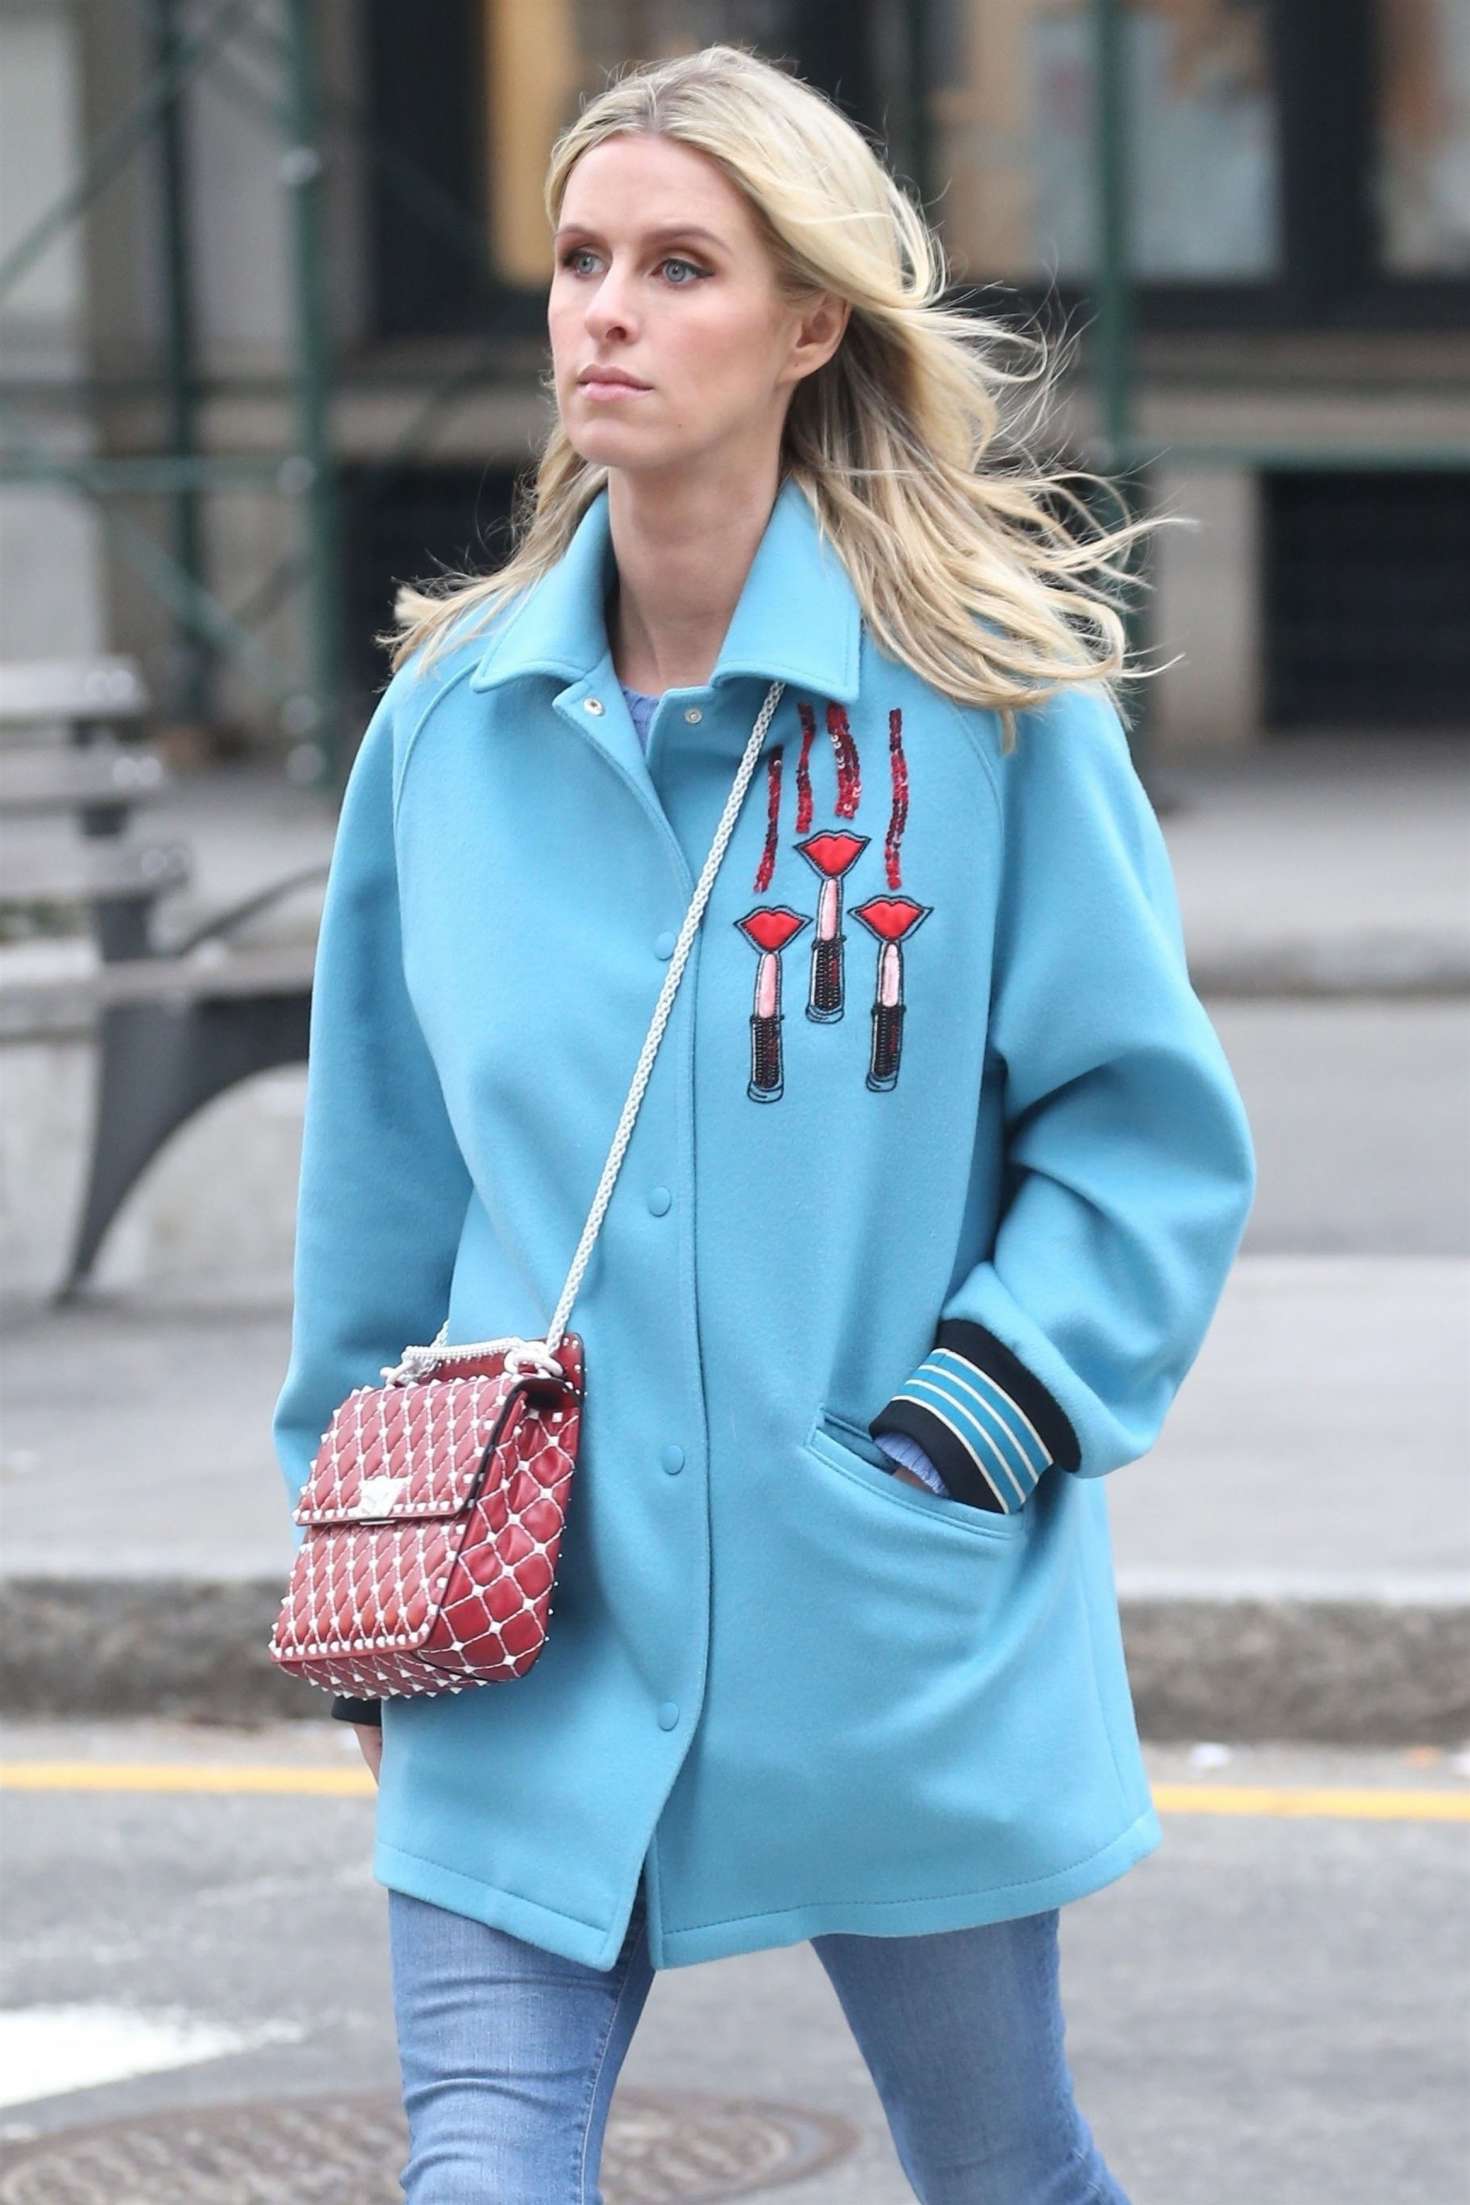 Nicky Hilton 2018 : Nicky Hilton out and about in New York -09